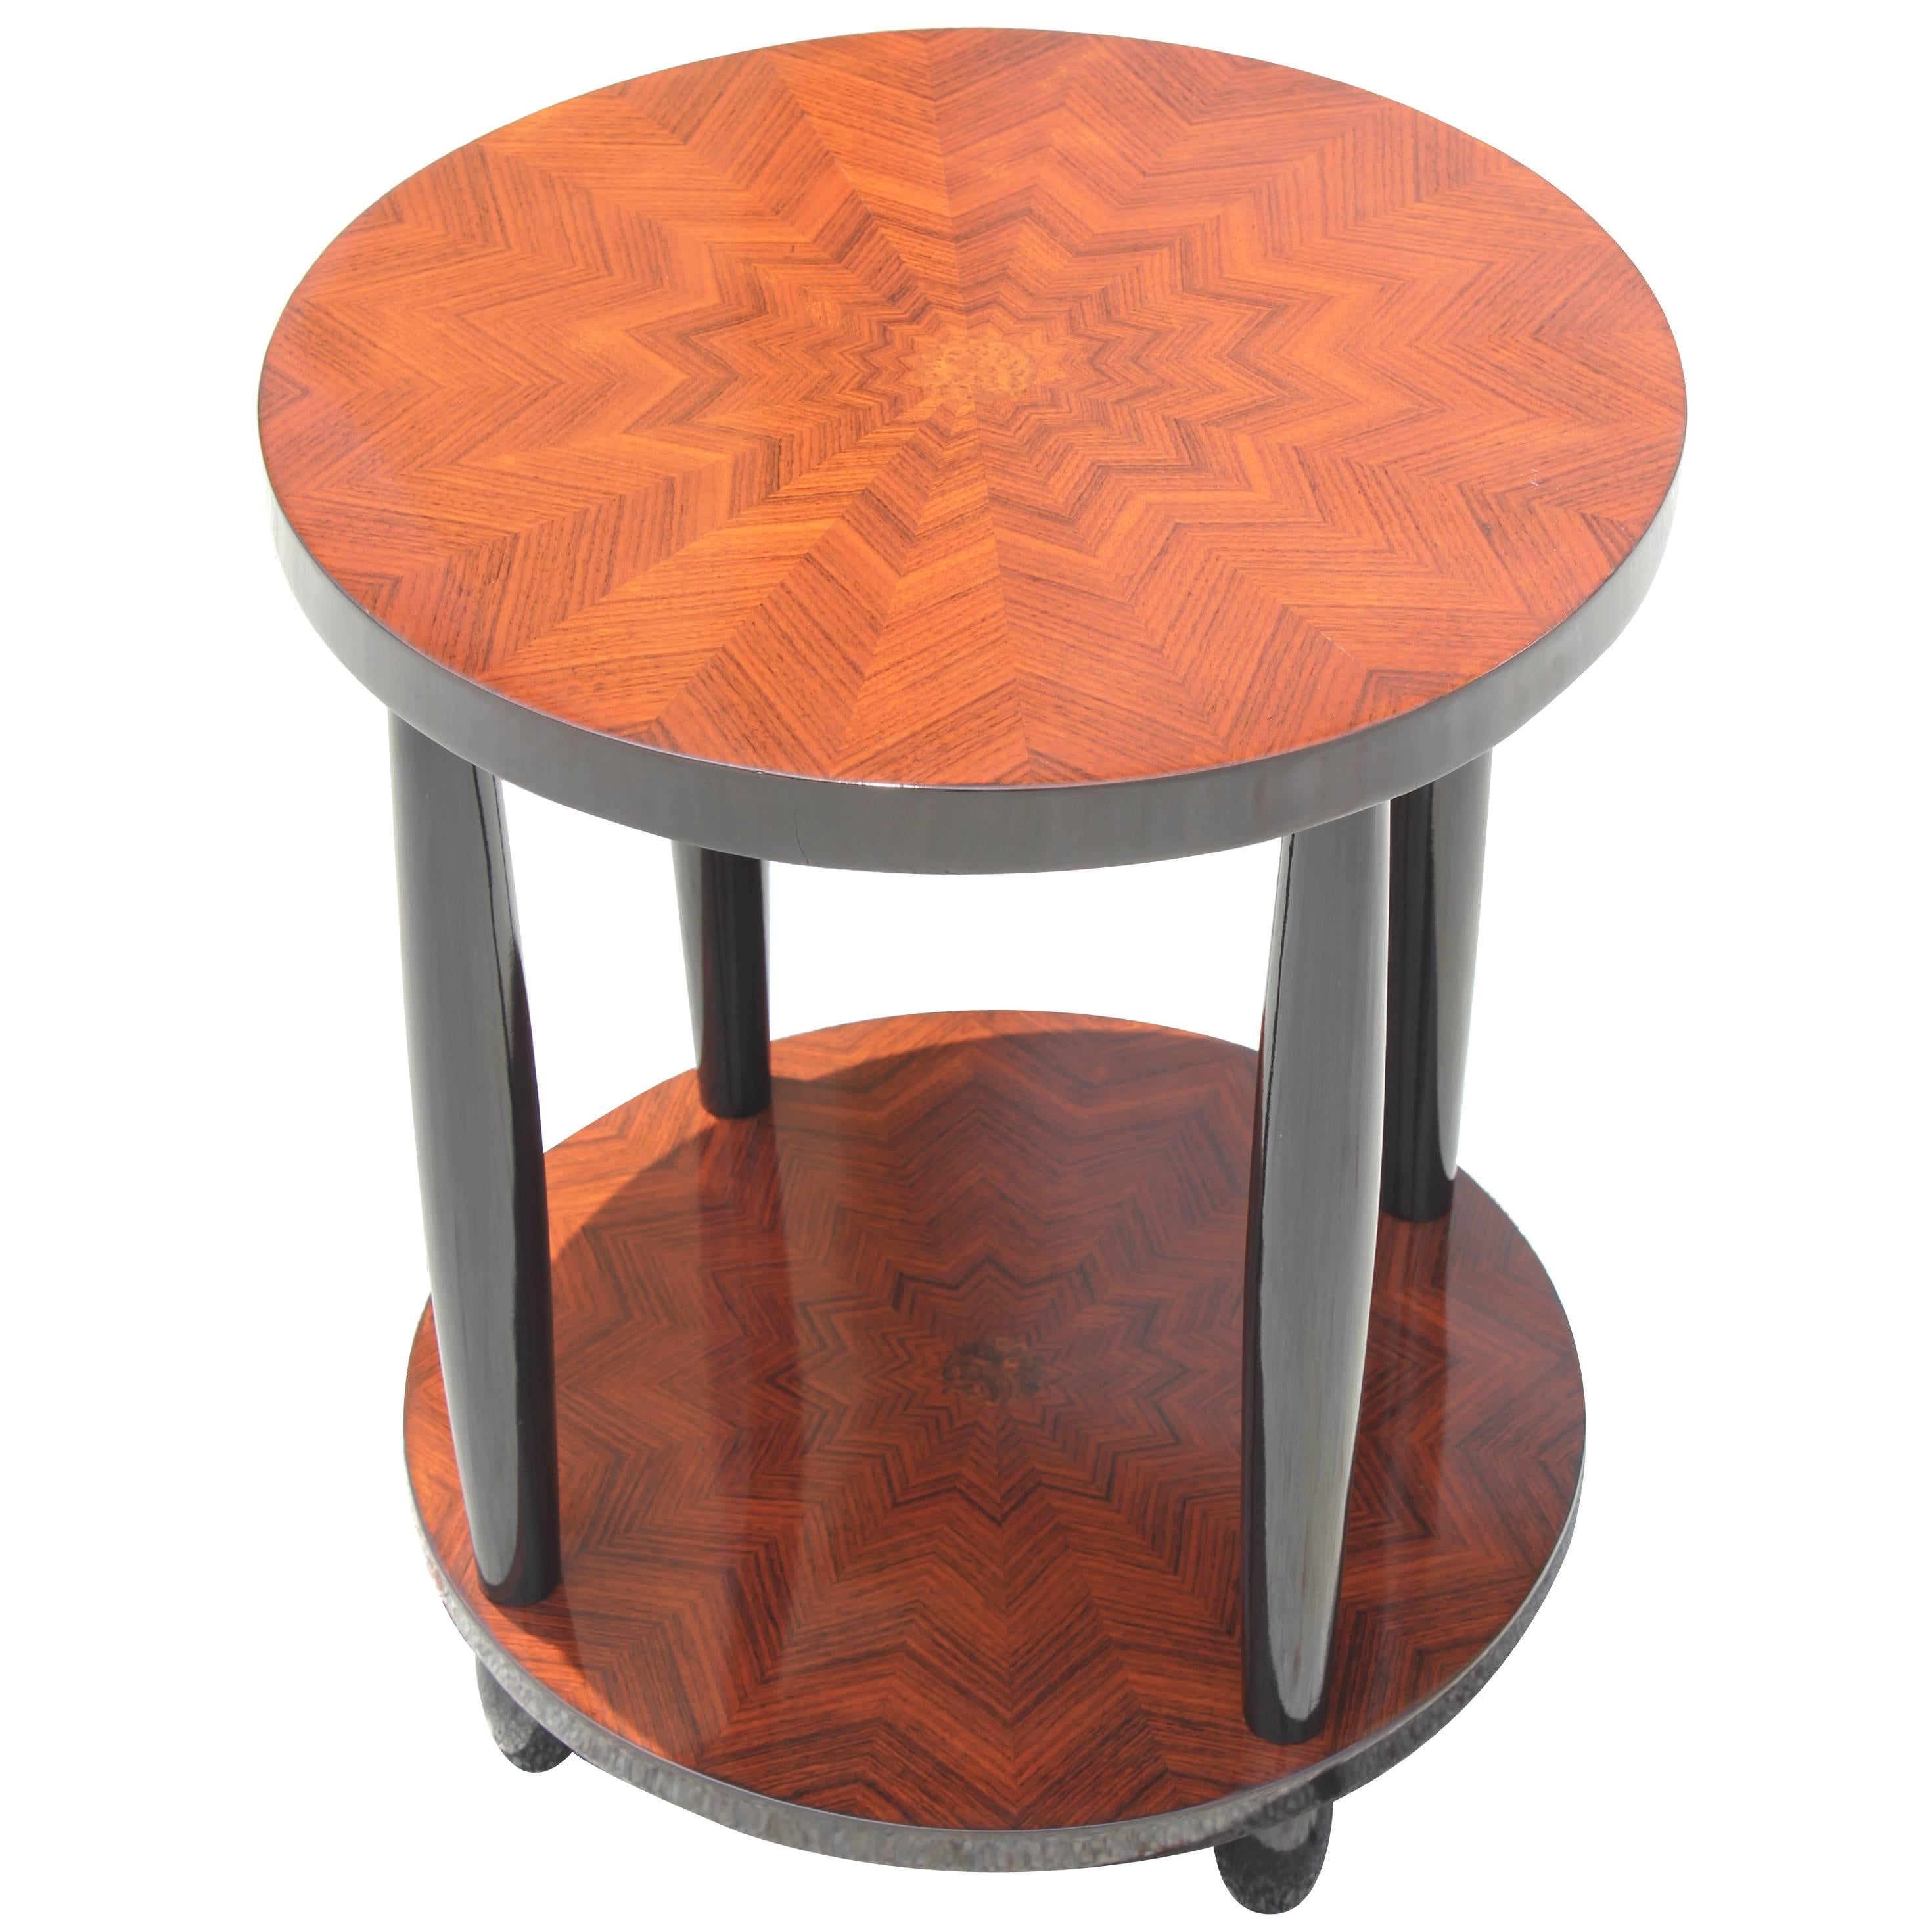 French Art Deco Two-Tier Palisander Inlay "Starburst" Accent Table, circa 1940s